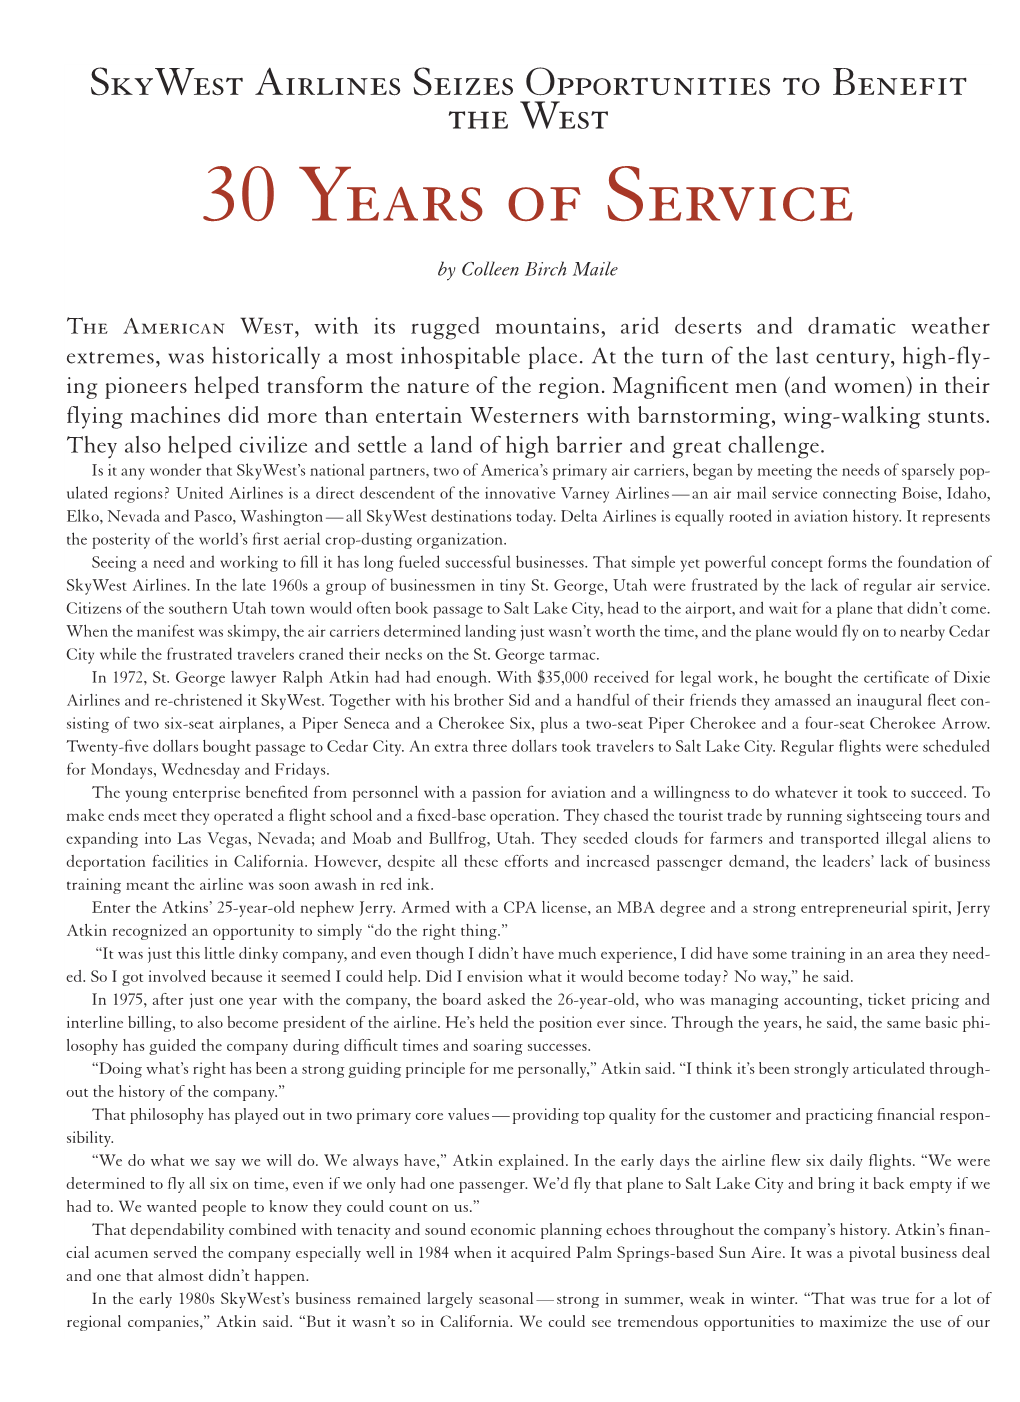 30 Years of Service by Colleen Birch Maile